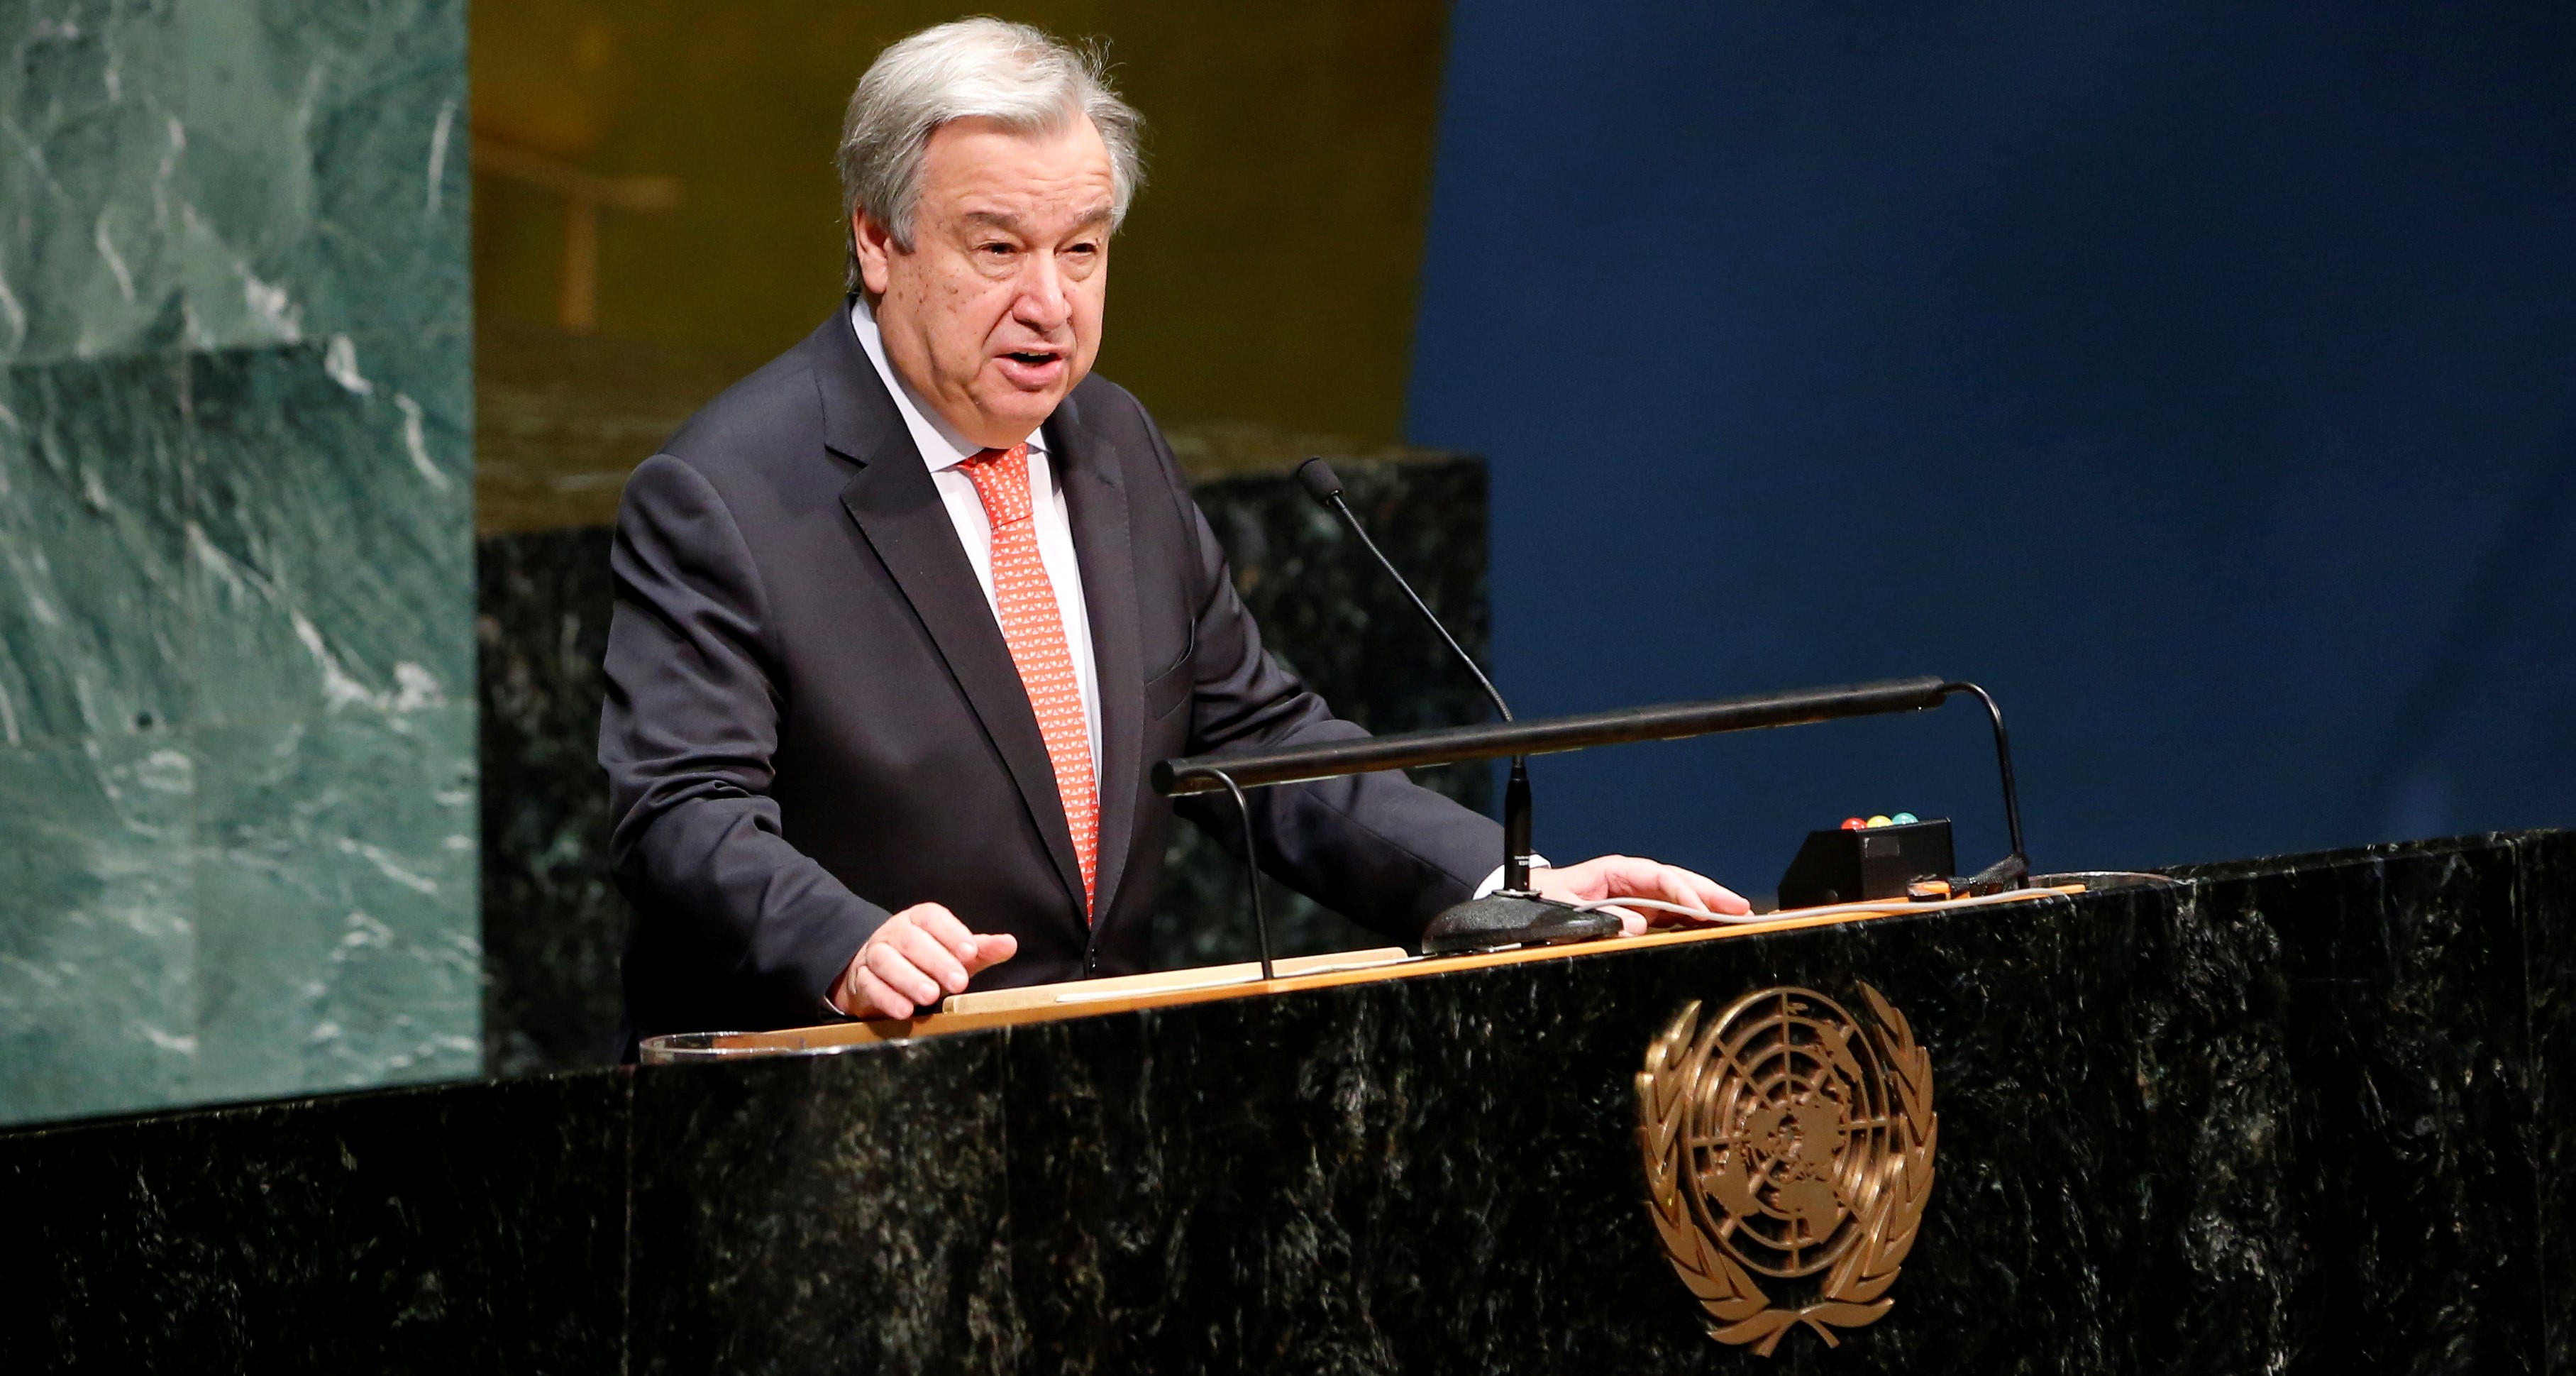 'War against nature must stop,' UN chief says before climate talks